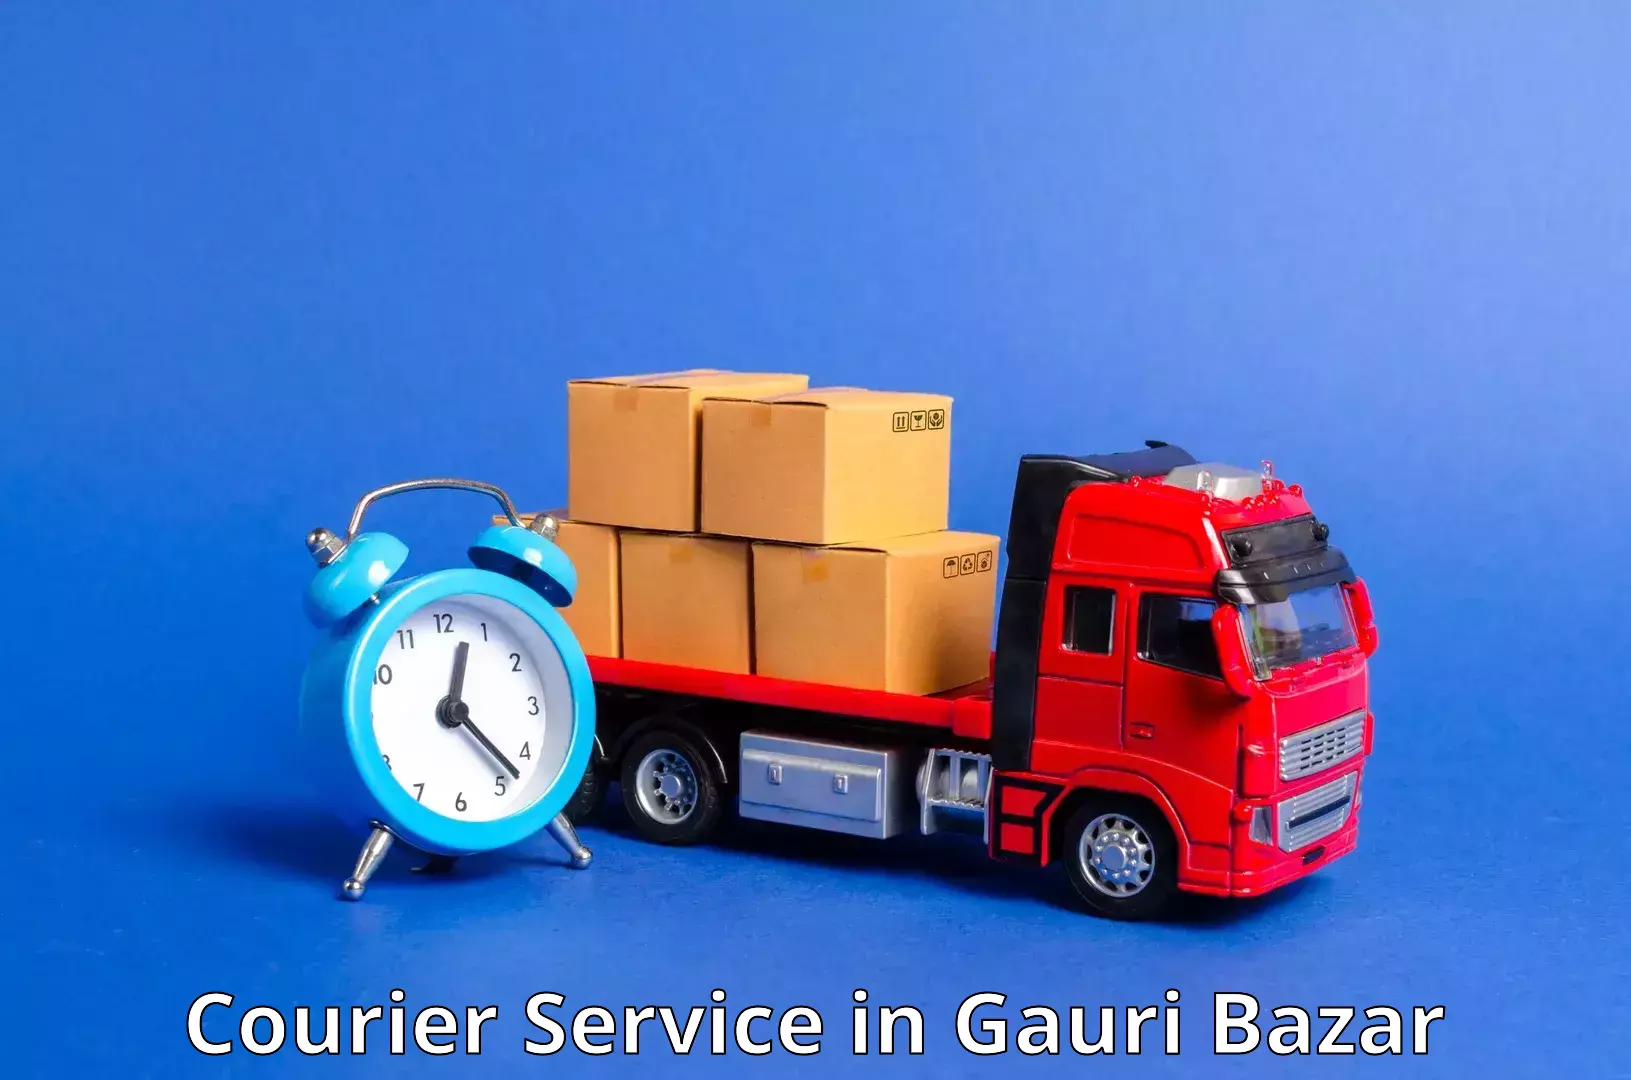 Automated shipping processes in Gauri Bazar